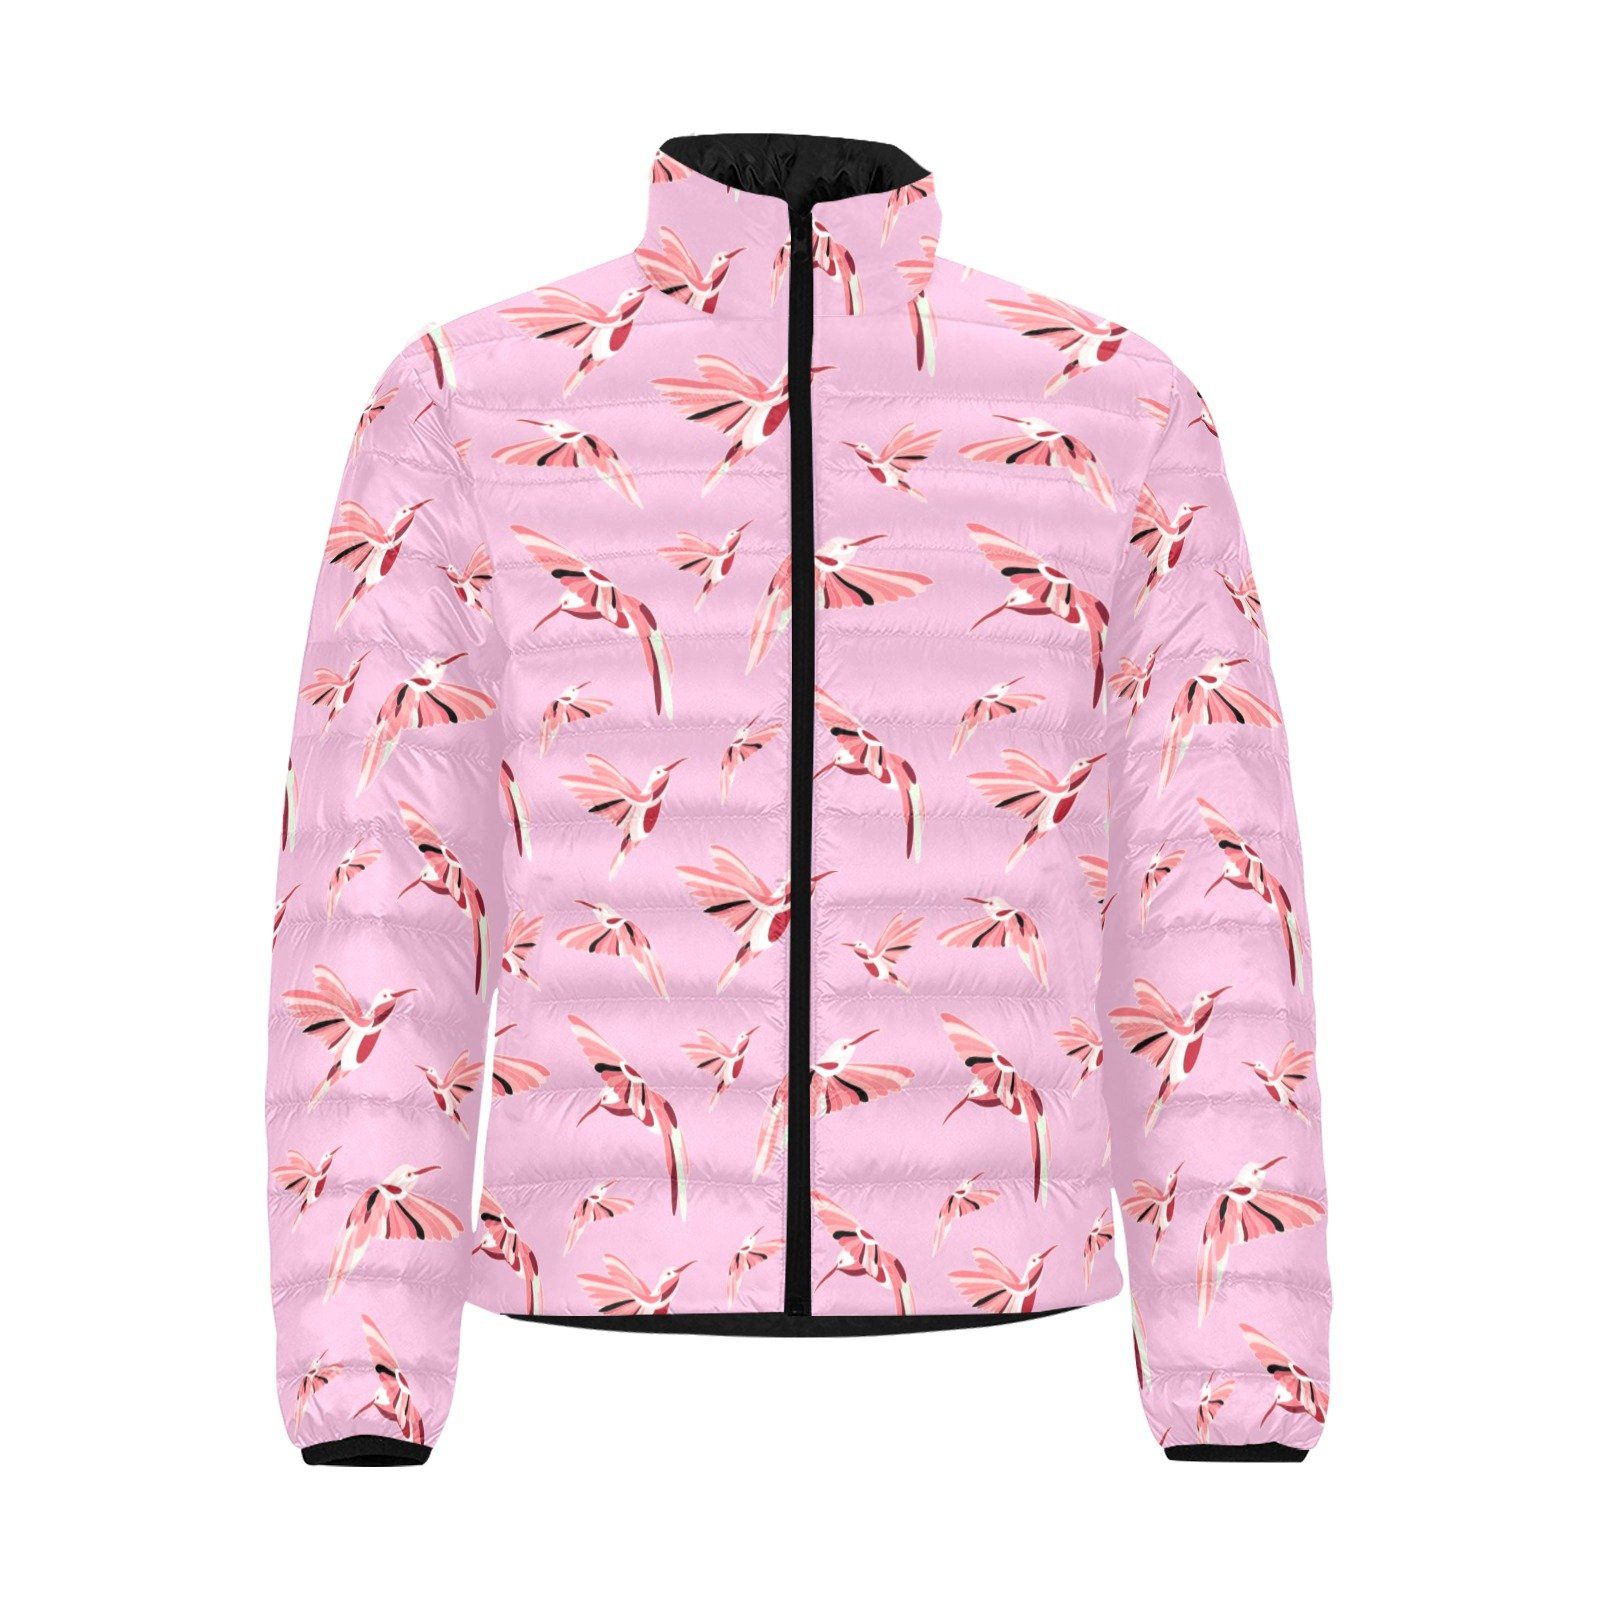 Strawberry Pink Men's Stand Collar Padded Jacket (Model H41) Men's Stand Collar Padded Jacket (H41) e-joyer 